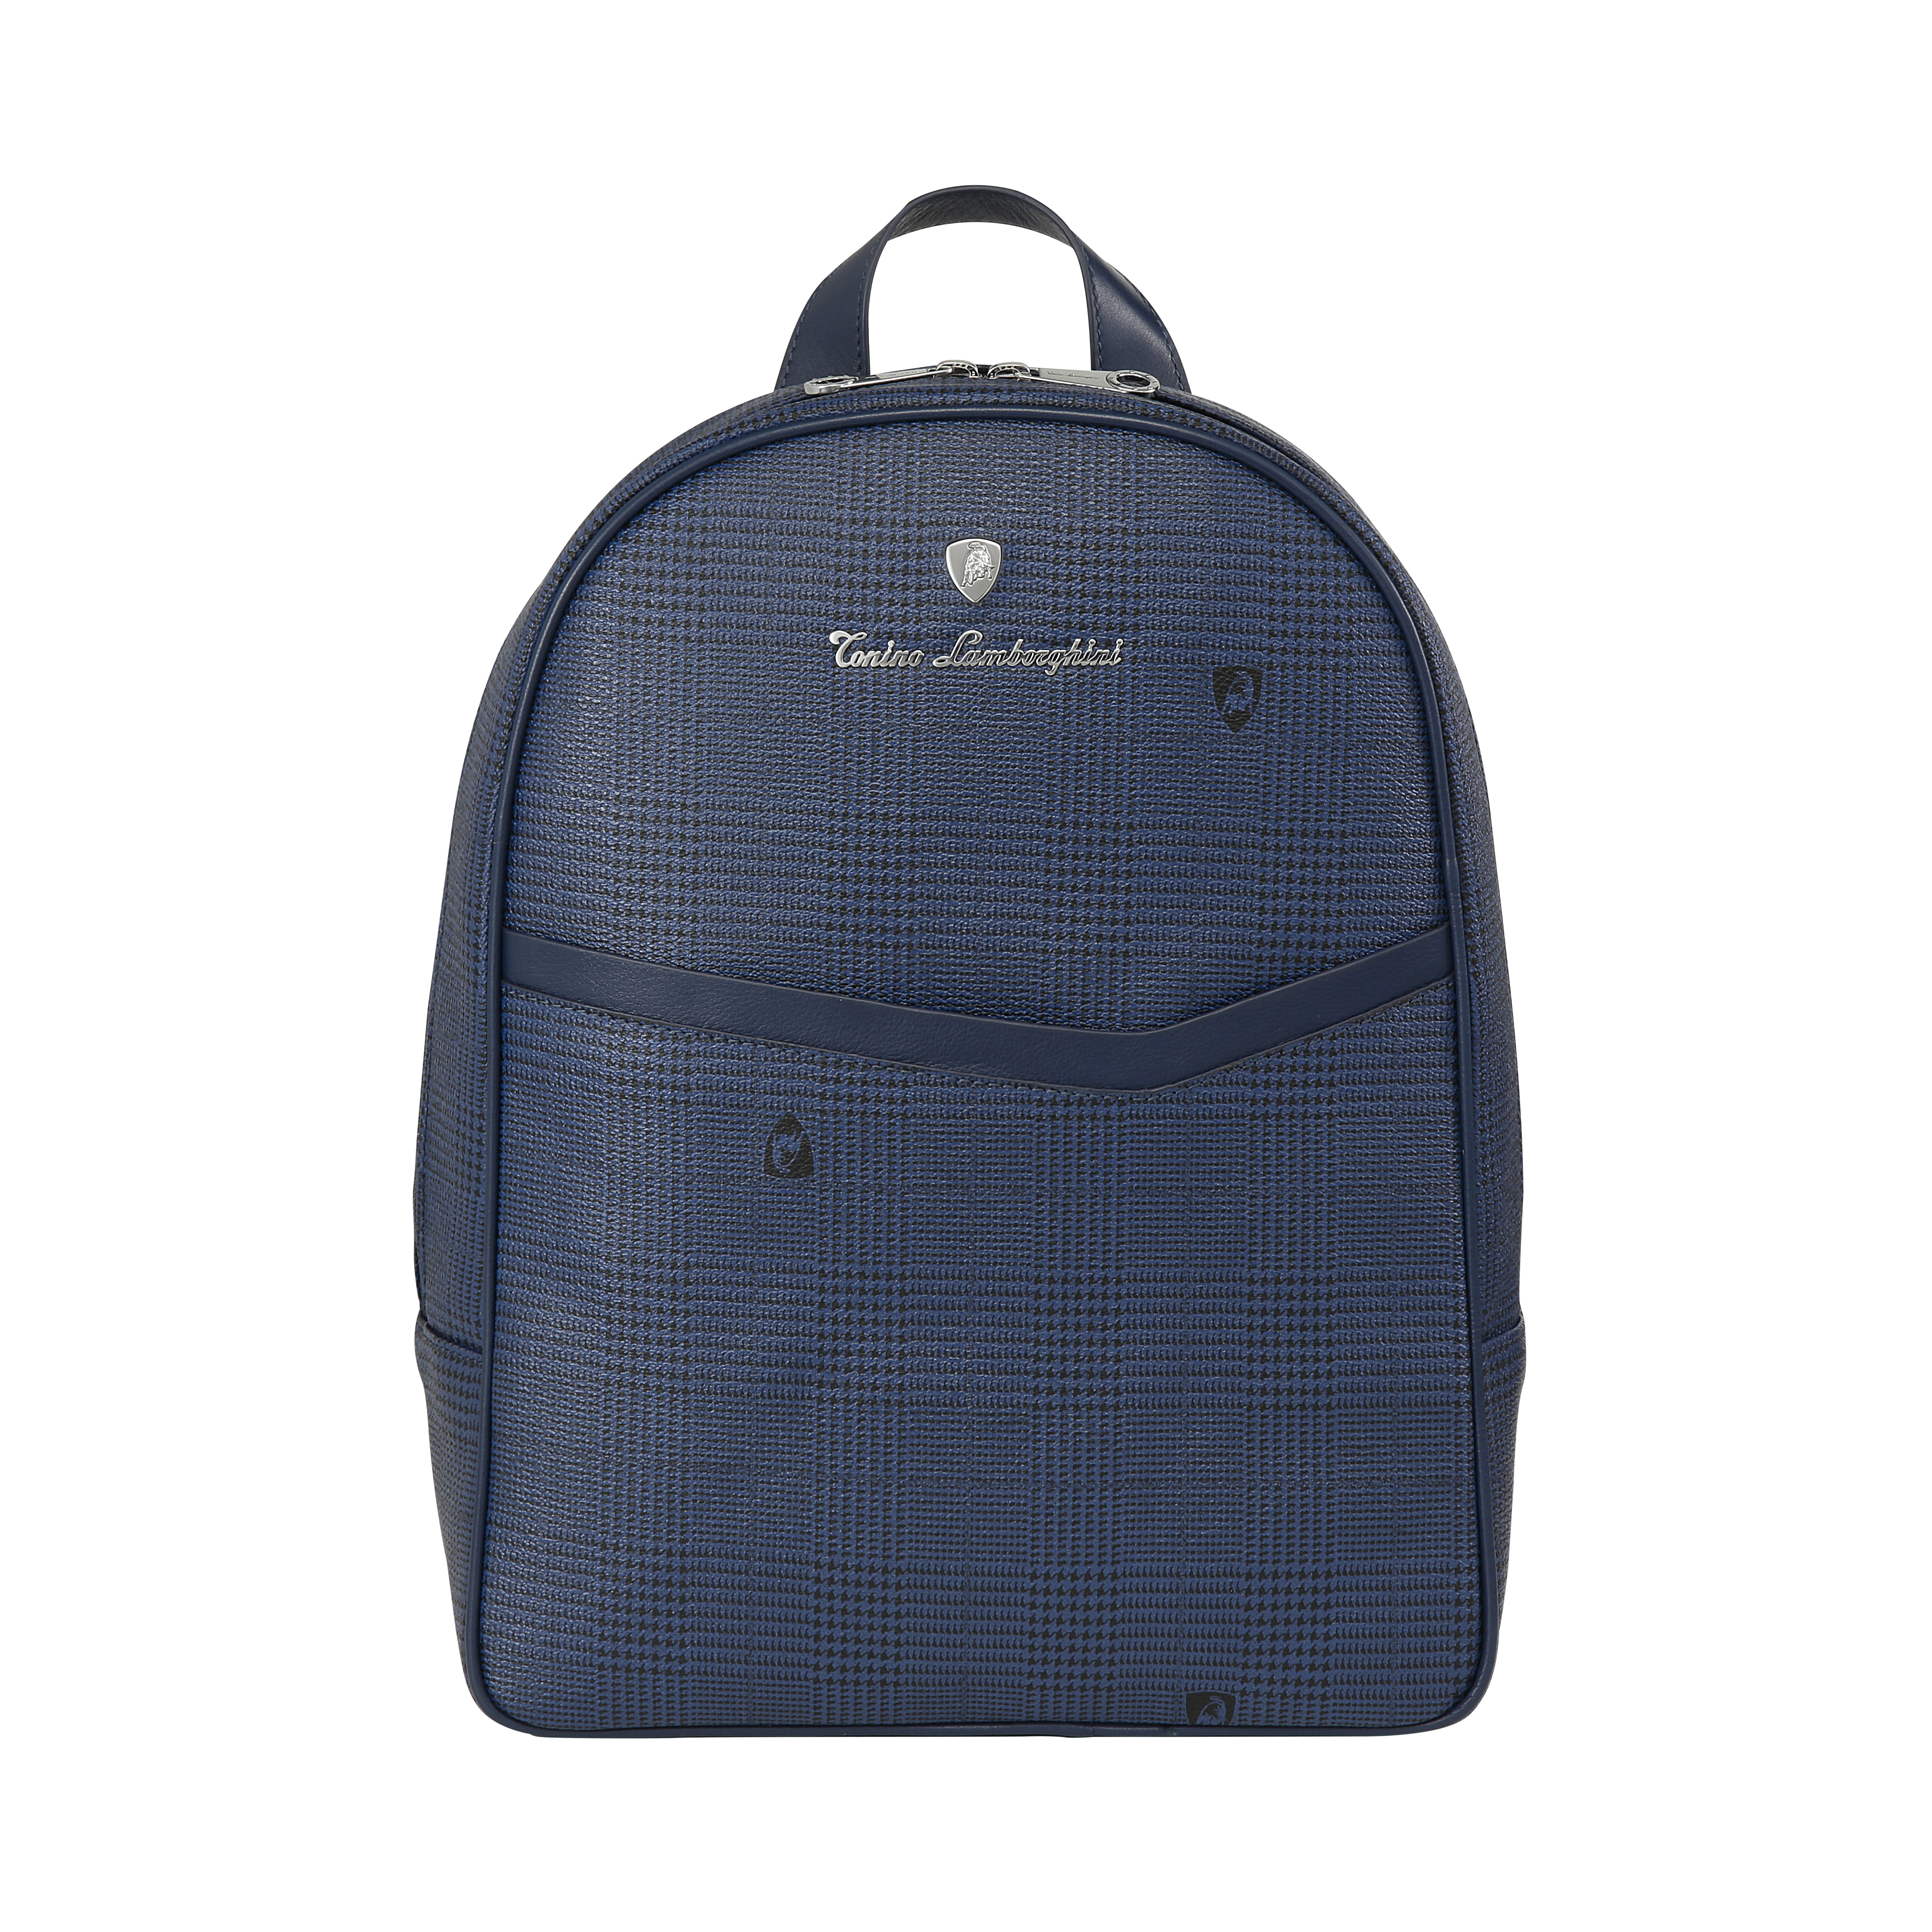 Backpack S Ipad single comp Galles Navy Galles